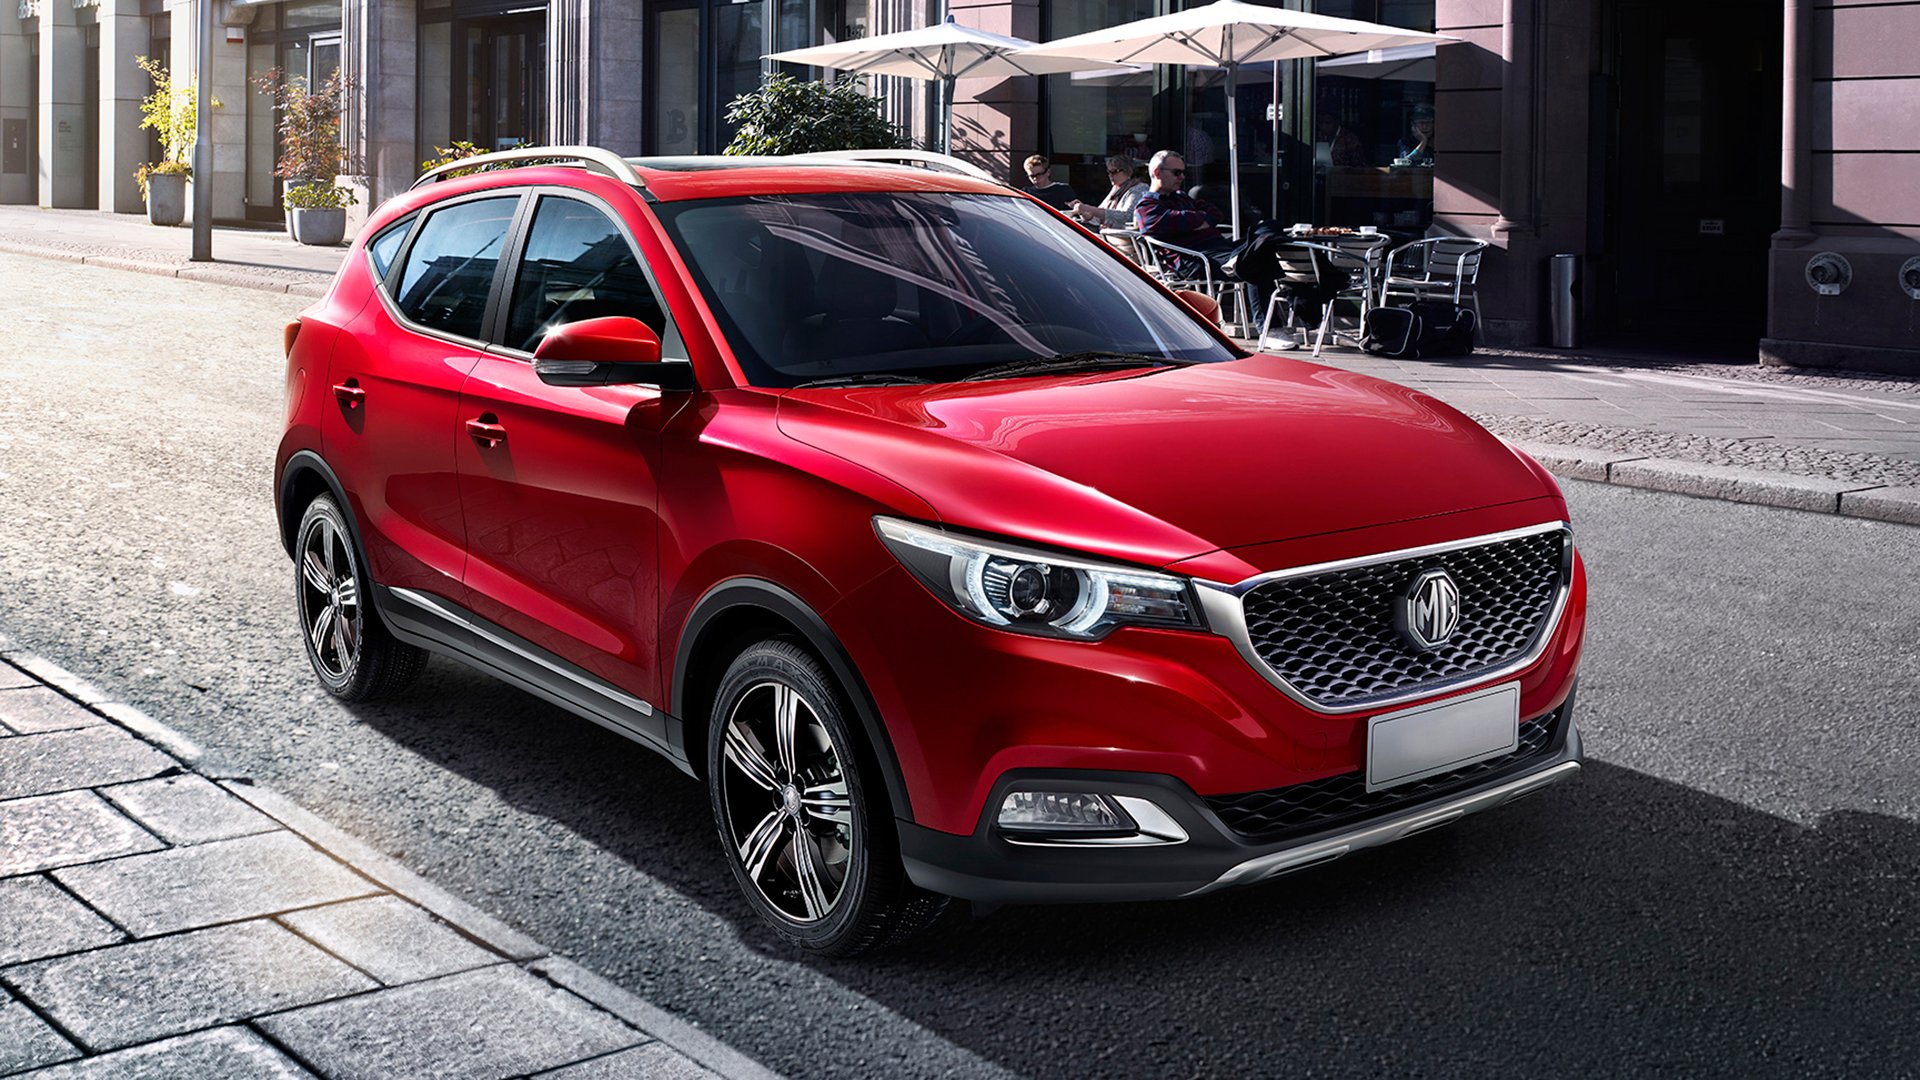 MG unveils new XS SUV at London Motor Show | Auto Trader UK